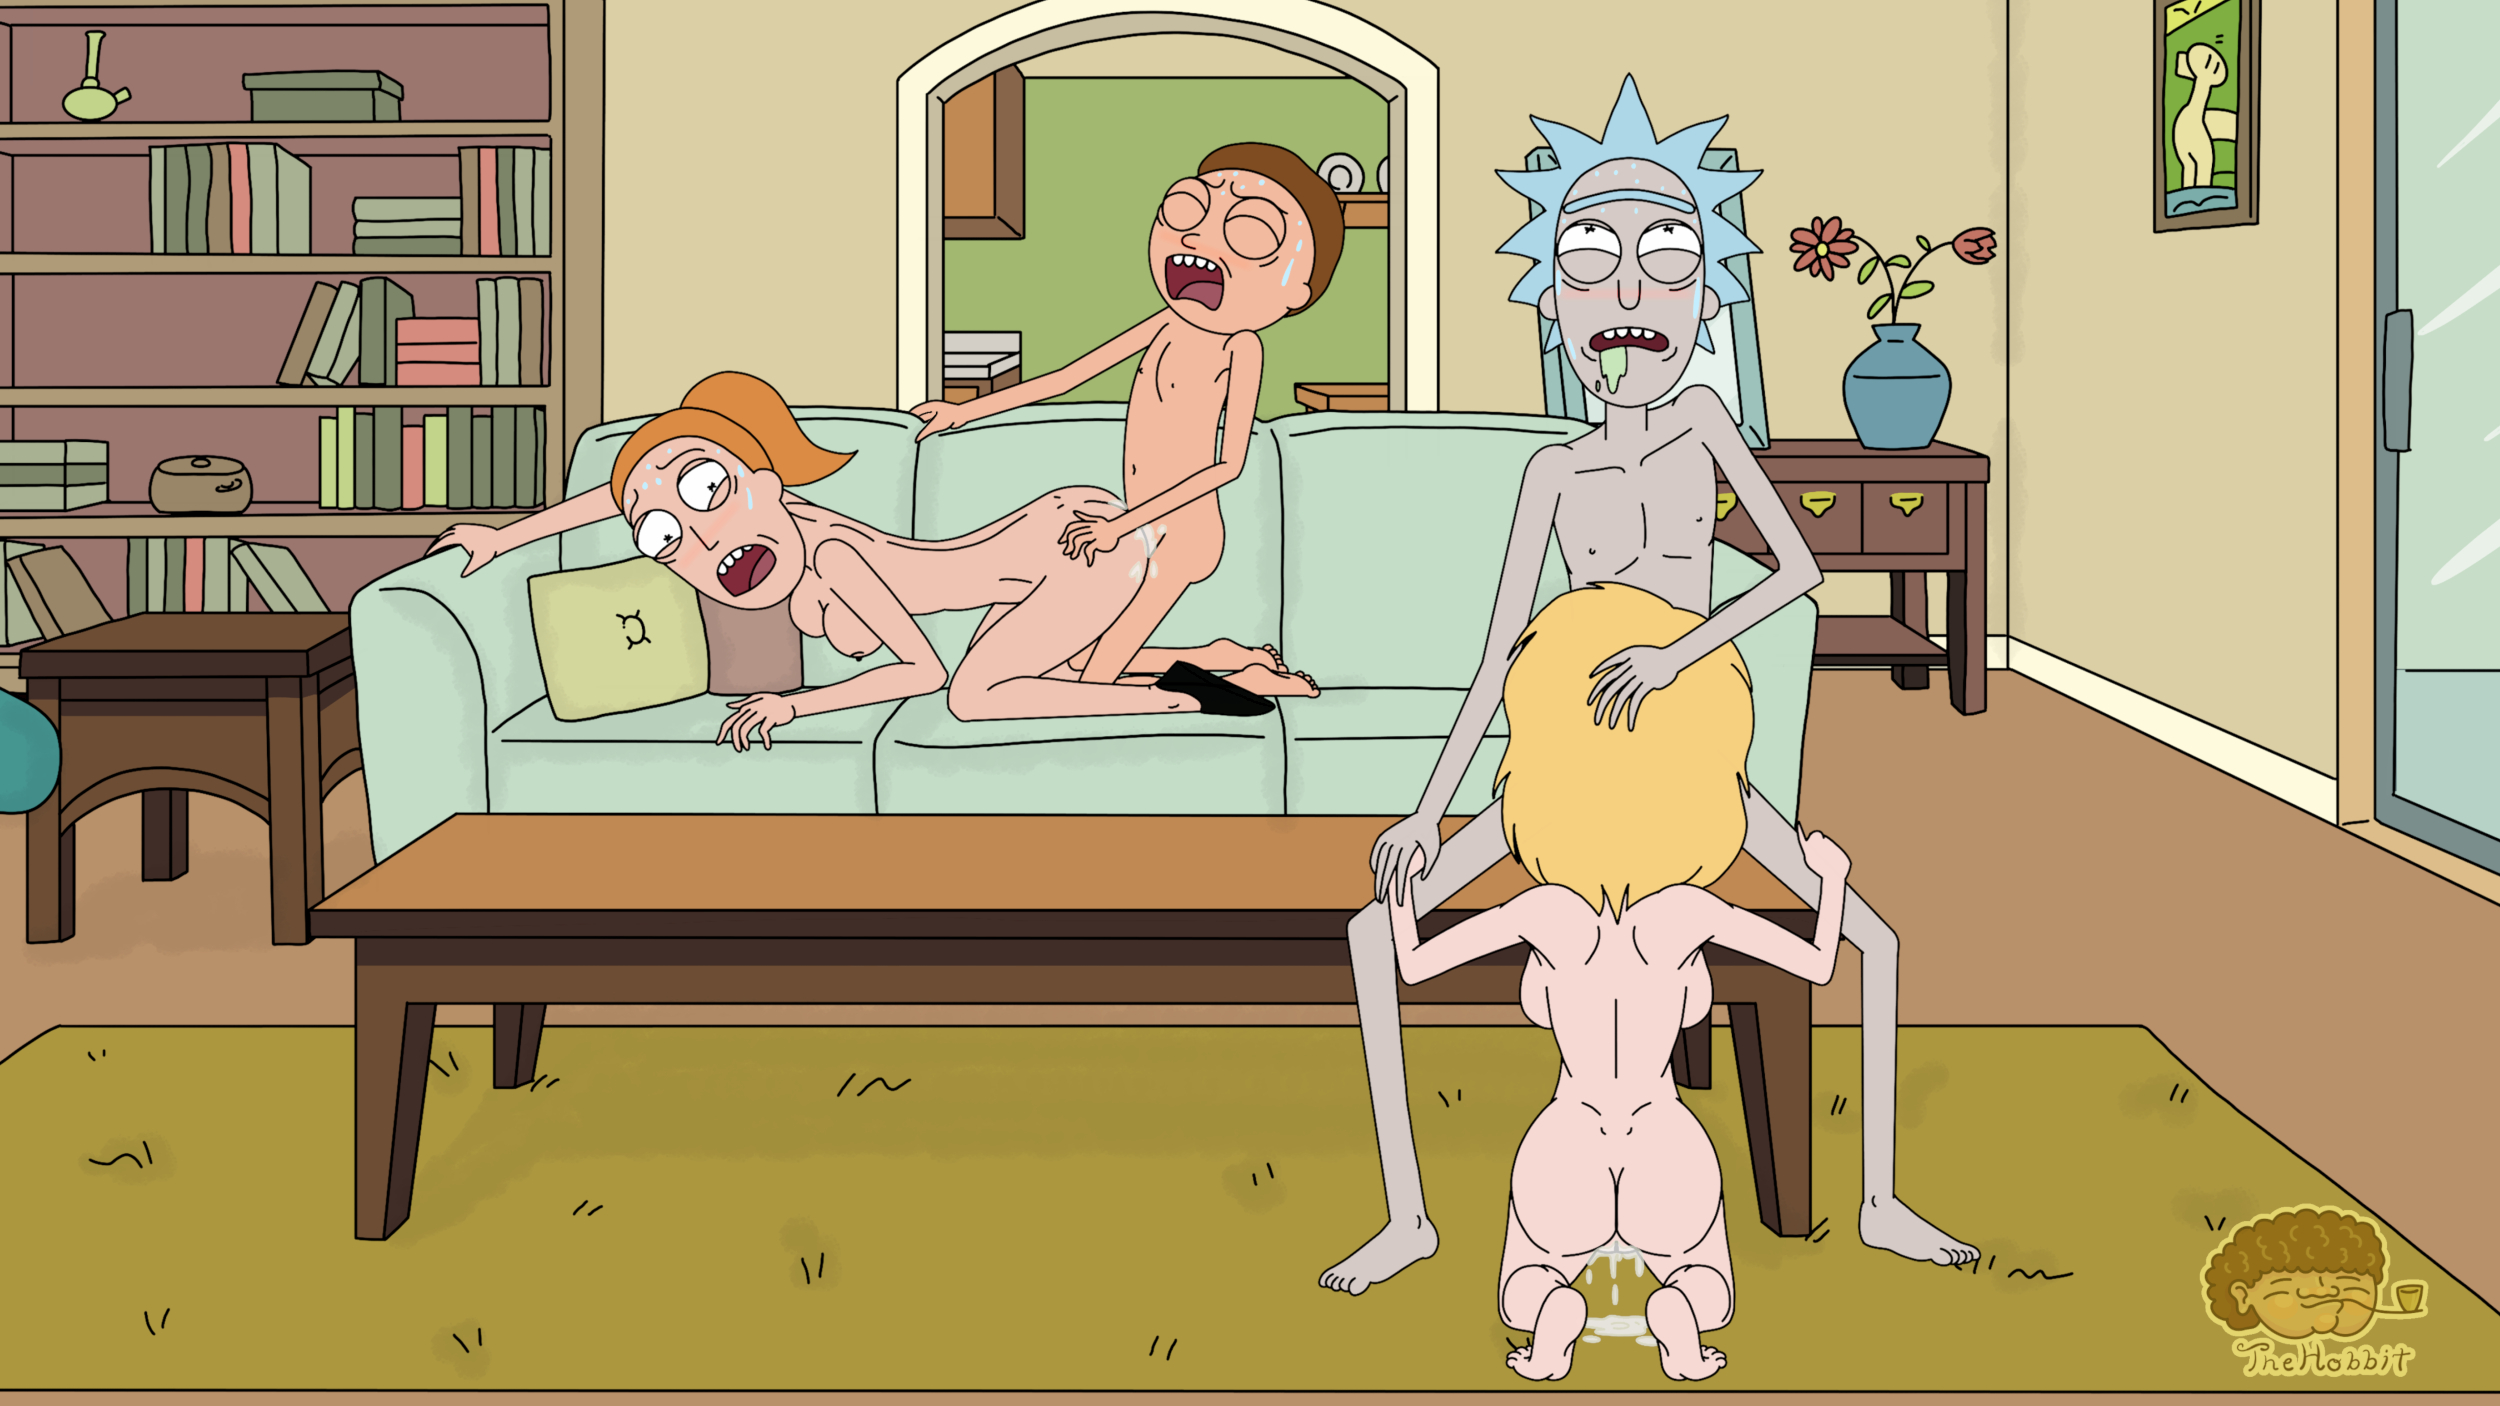 4094755 - Beth_Smith Morty_Smith Rick_Sanchez Rick_and_Morty Summer_Smith T...